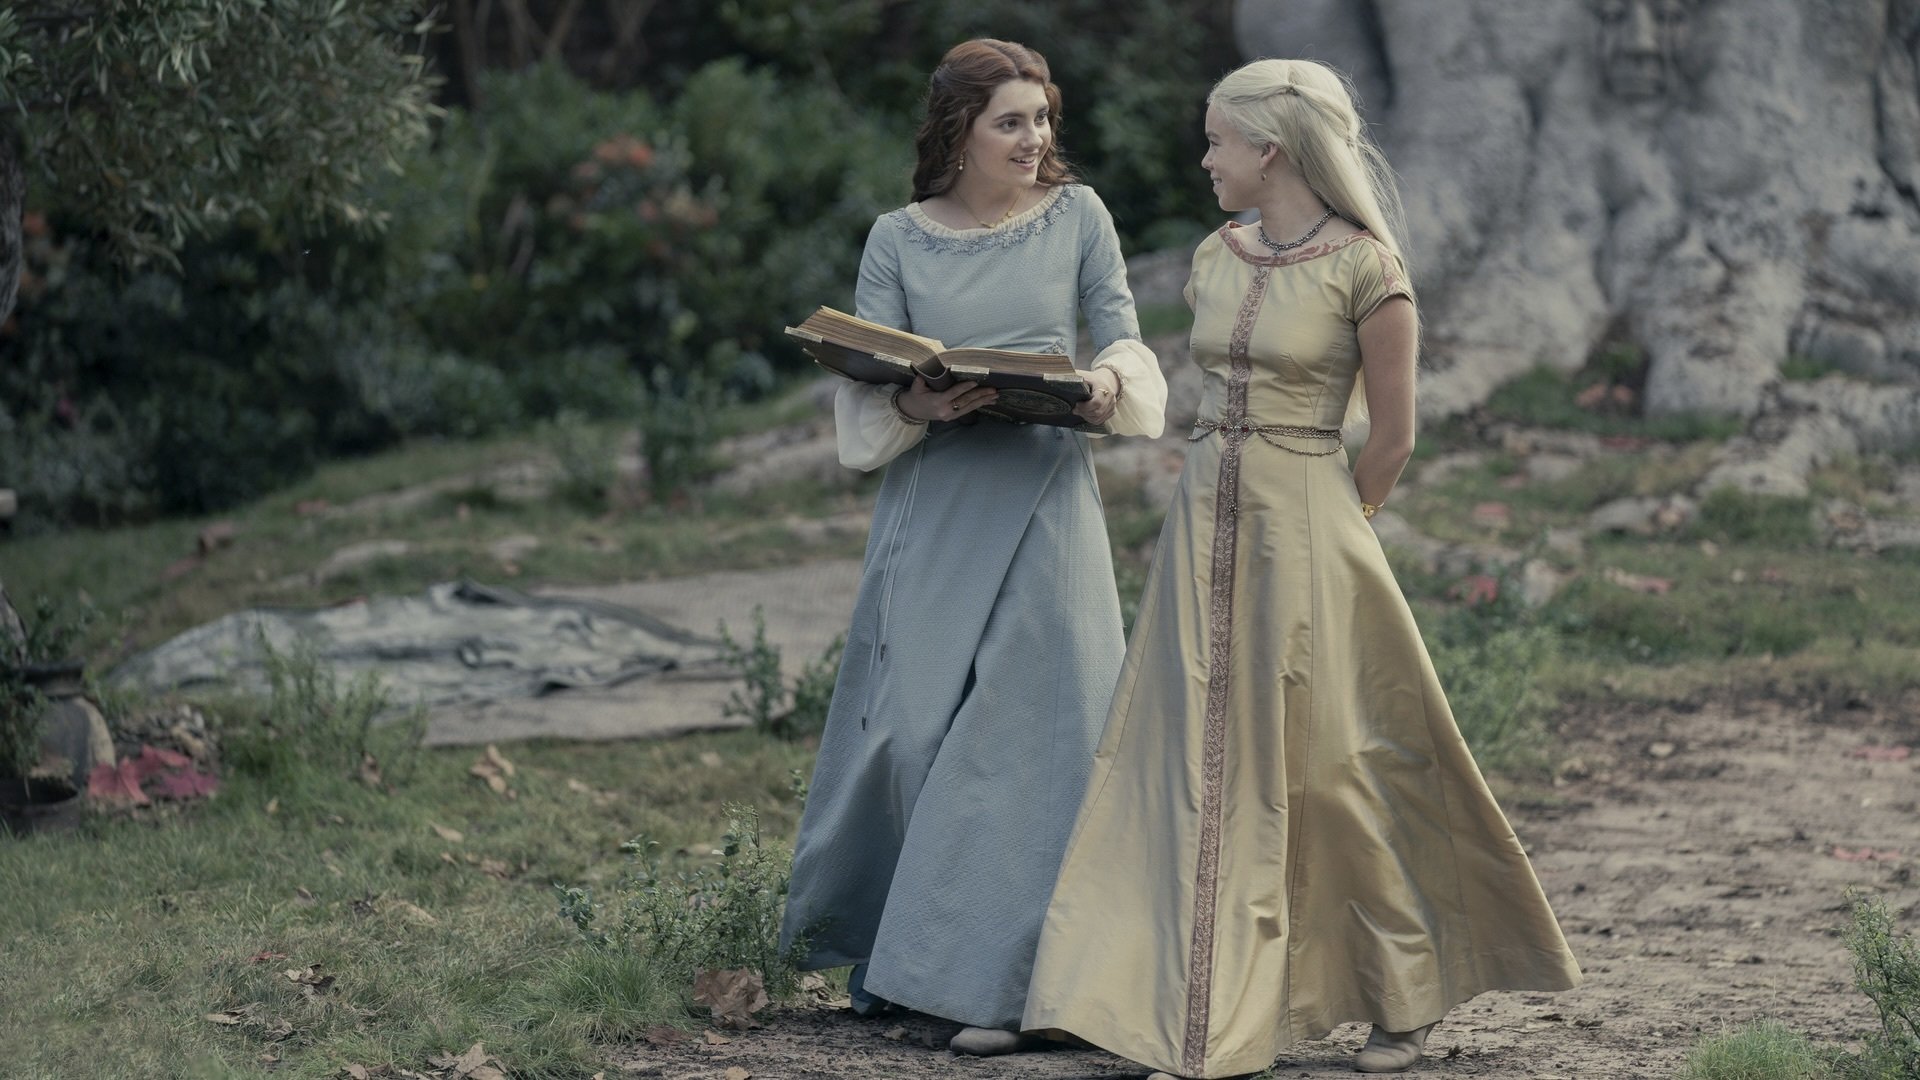 Two young women in lavish fantasy dresses walking through a garden. One holds a large, open book.